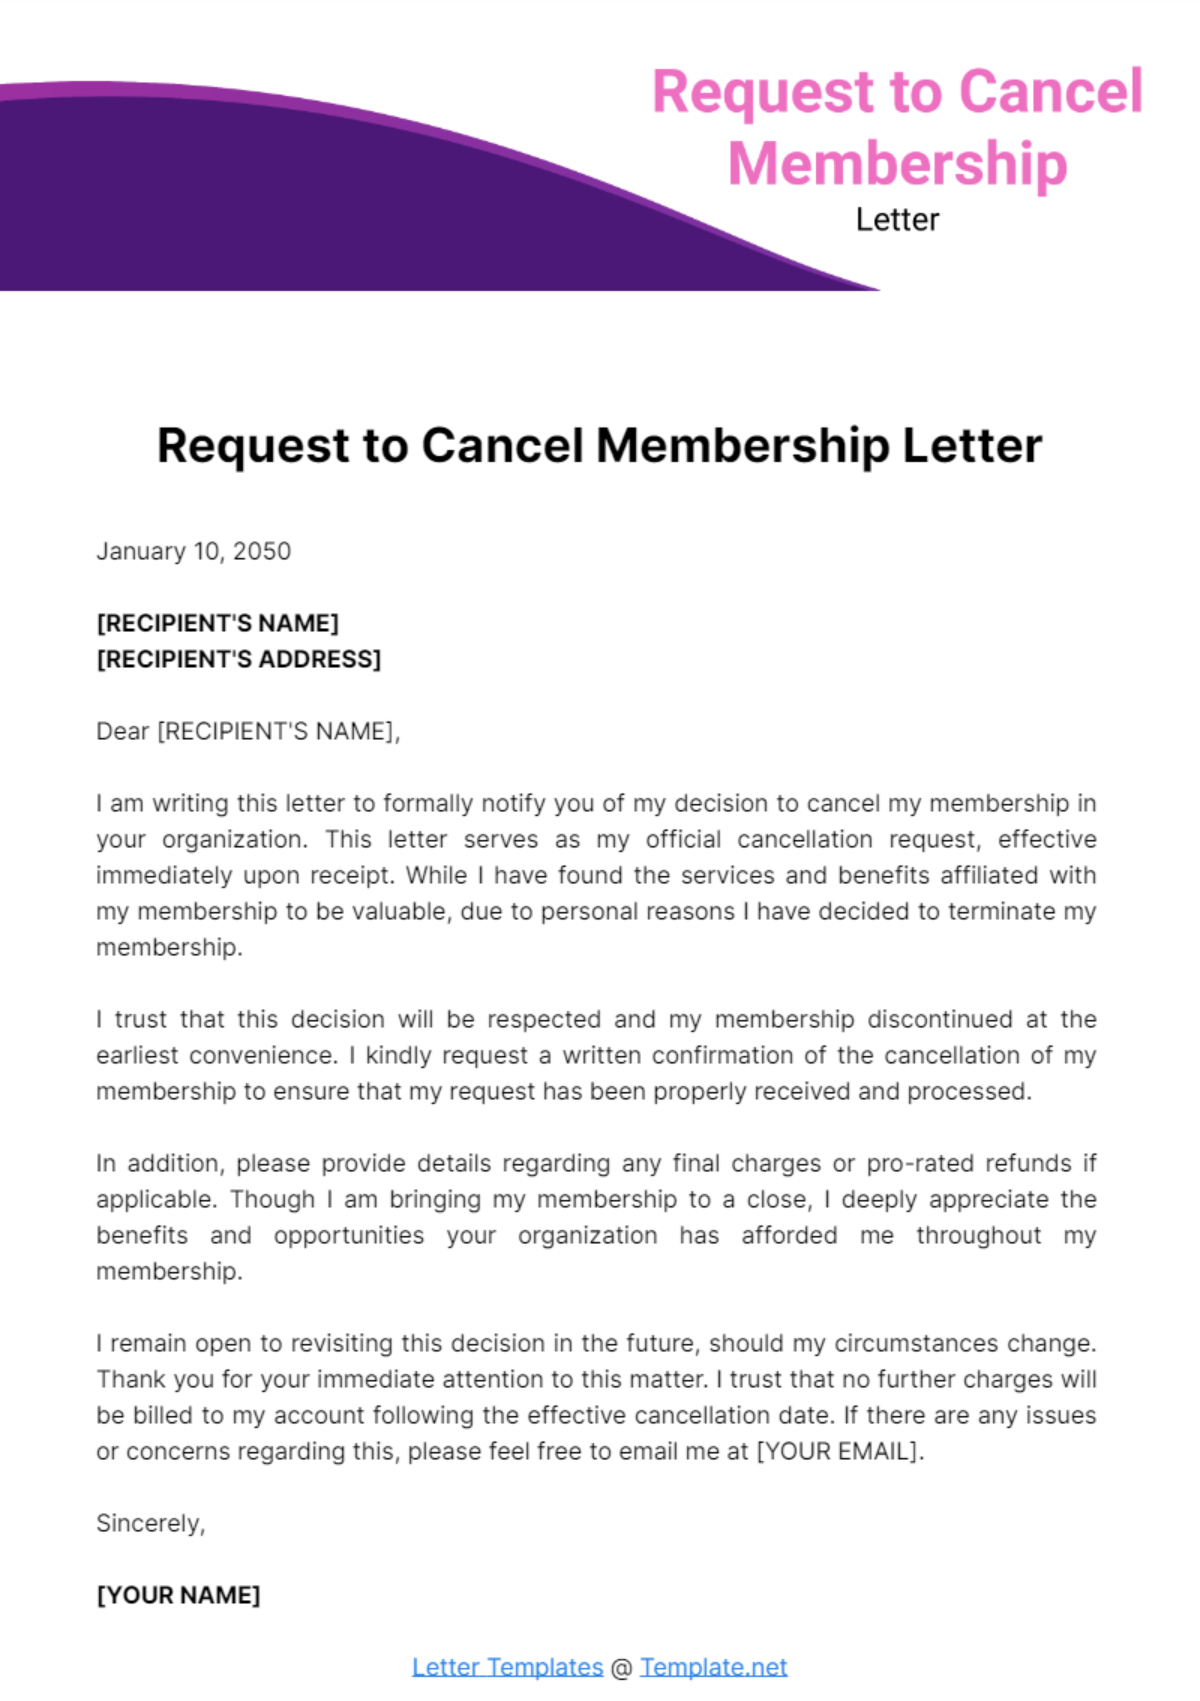 Free Request to Cancel Membership Letter Template